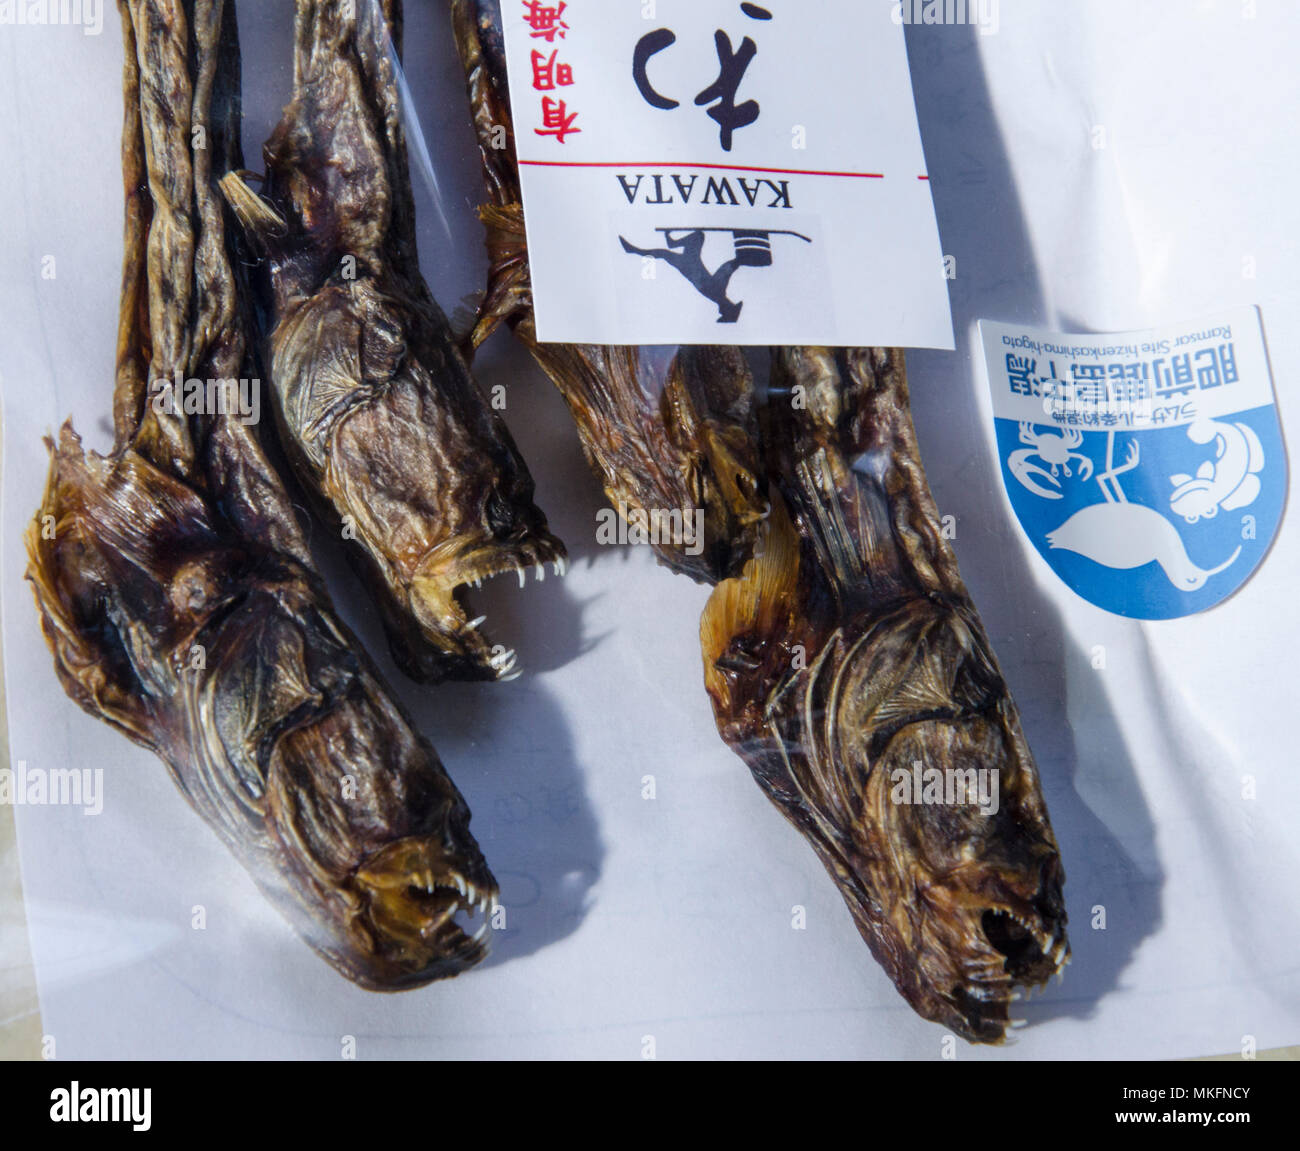 Warasebo (Odontamblyopus lacepedii), Kyushu Island, Japan, dried fish marketed, to be eaten, in a local shop in Japan. This long-lived fish lives in the mud. His head, and especially his strong teeth, earned him the nickname 'alien' in reference to the creature of the science fiction film. Stock Photo